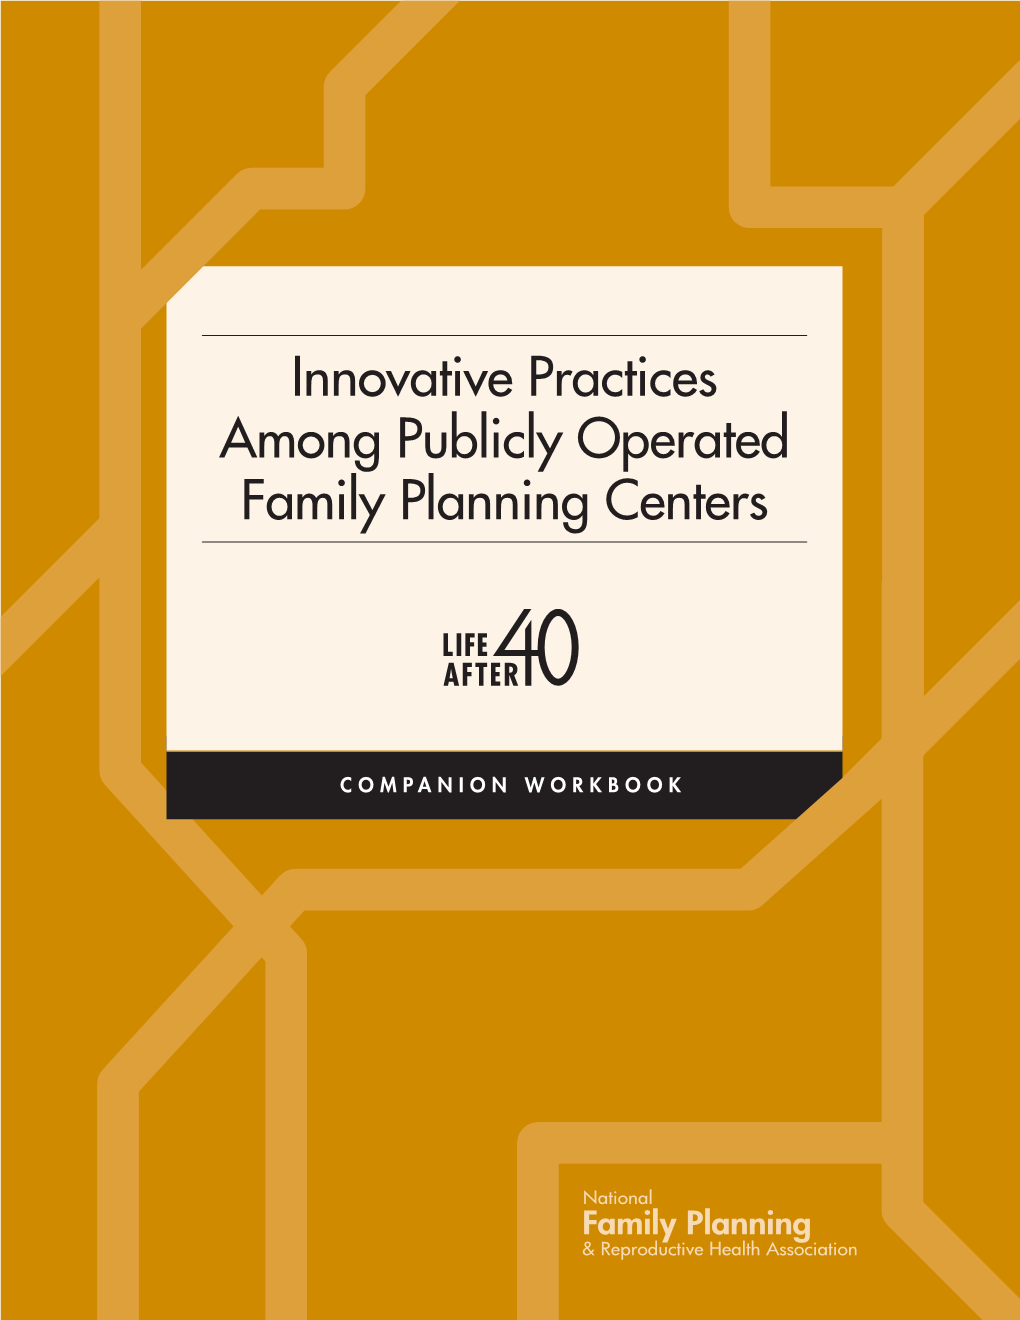 Innovative Practices Among Publicly Operated Family Planning Centers